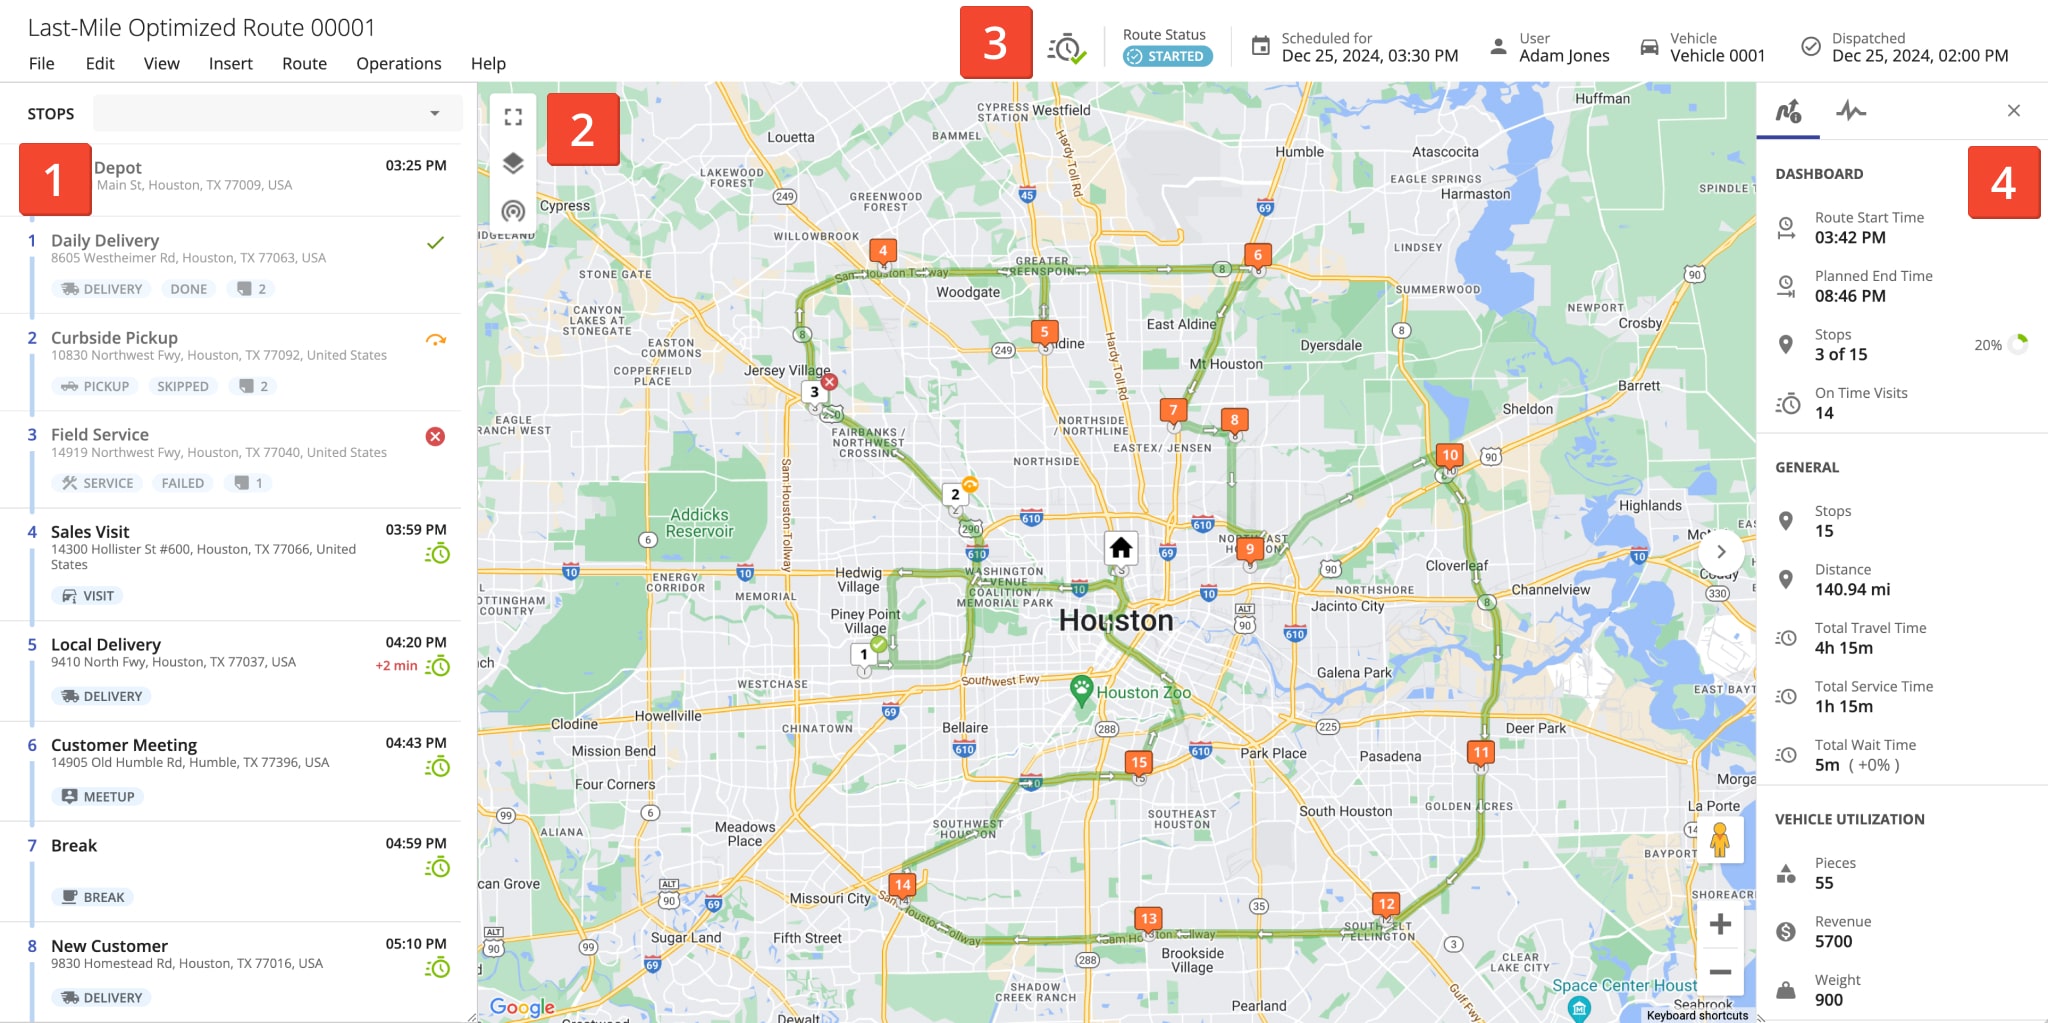 Route4Me's Route Editor consists of the stops list, interactive route map, toolbar with route and optimization settings, route dashboard, and activity feed.